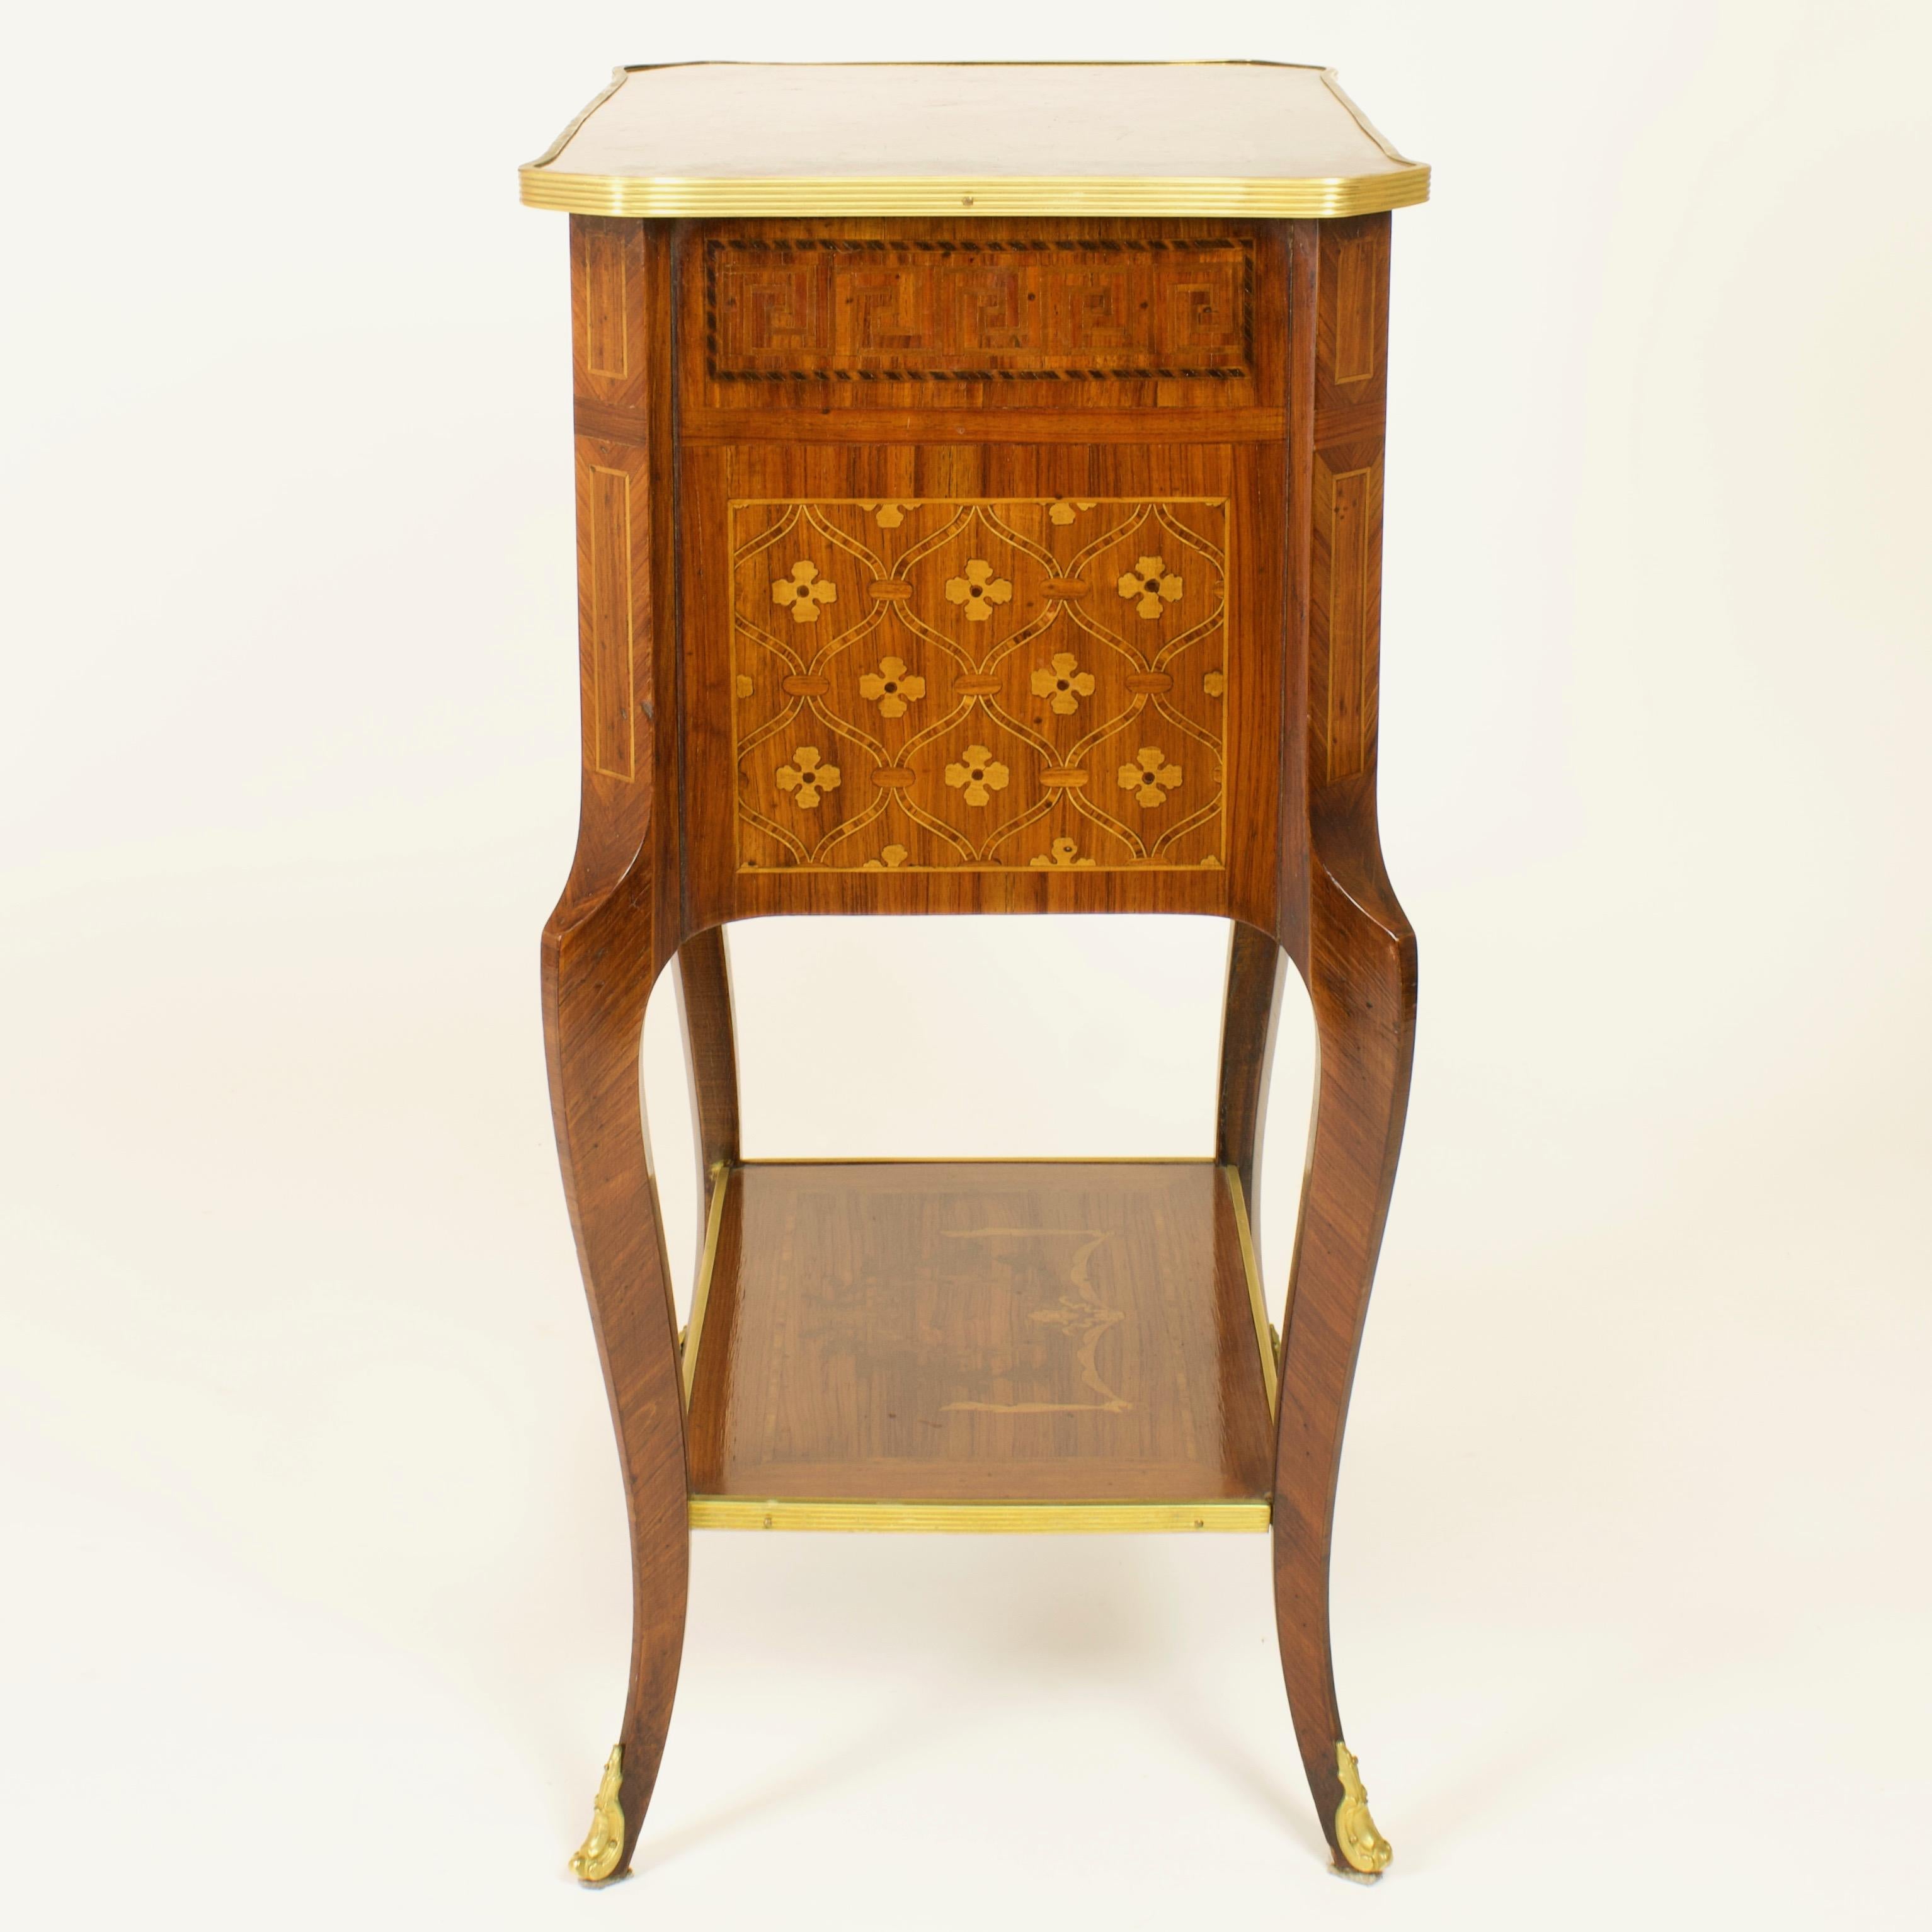 Late 19th Century French Transition/Louis XVI Marquetry a la Reine Side Table For Sale 2